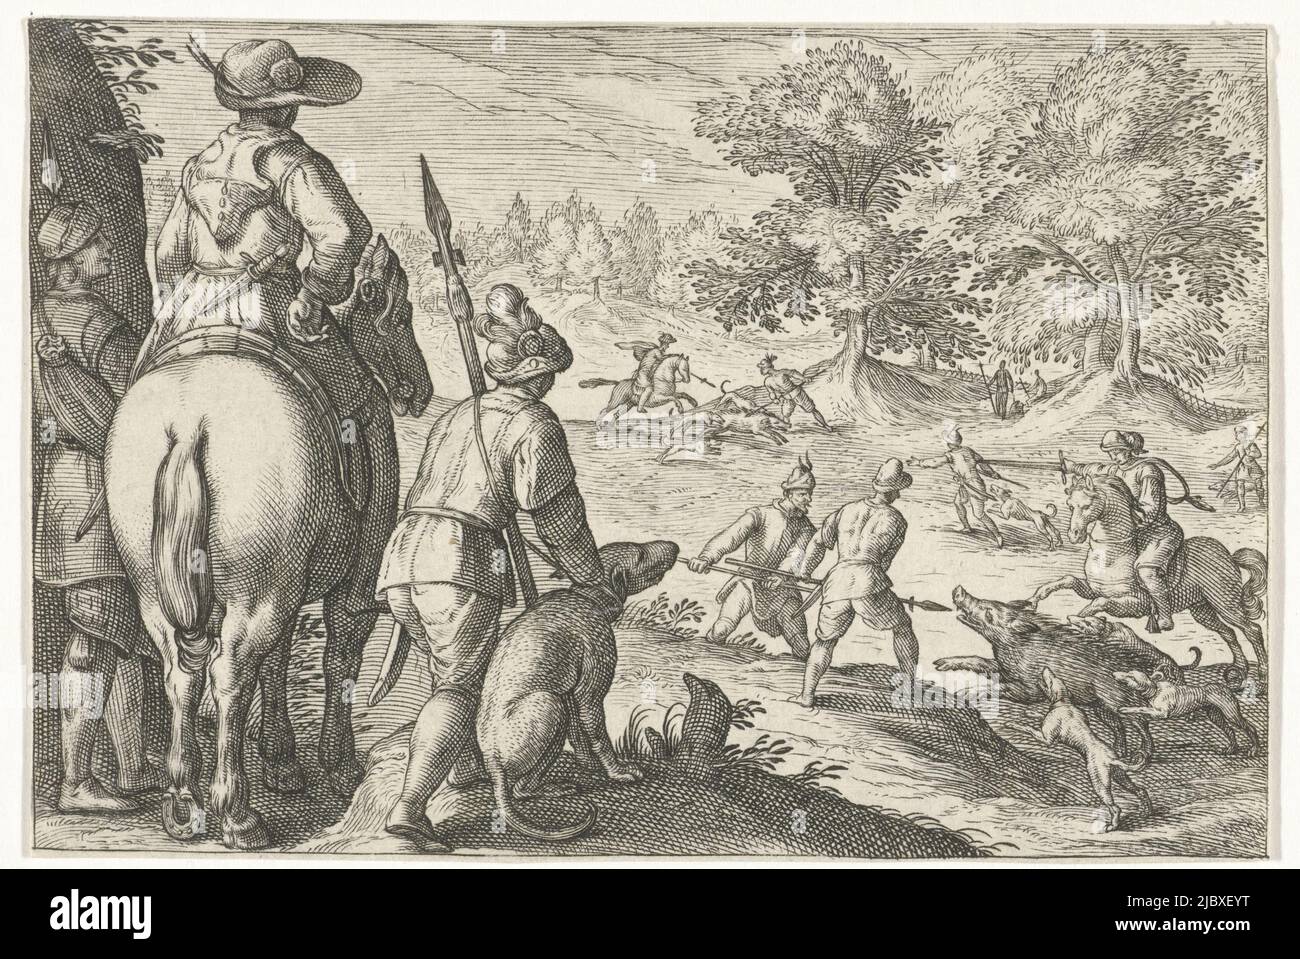 Hilly landscape with hunters and horsemen with spears hunting wild boar. On the left in the foreground a horseman, two men with spears and a dog, seen from behind. Print from a series of hunting scenes, Landscape with wild boar hunting Hunting scenes (title series) Icones Venantum Species Varias Representantes (title series), print maker: Egbert Jansz., Antonio Tempesta, publisher: Johann Theodor en Johann Israel de Bry, Zuid-Nederland, 1598, paper, engraving, h 85 mm × w 118 mm Stock Photo